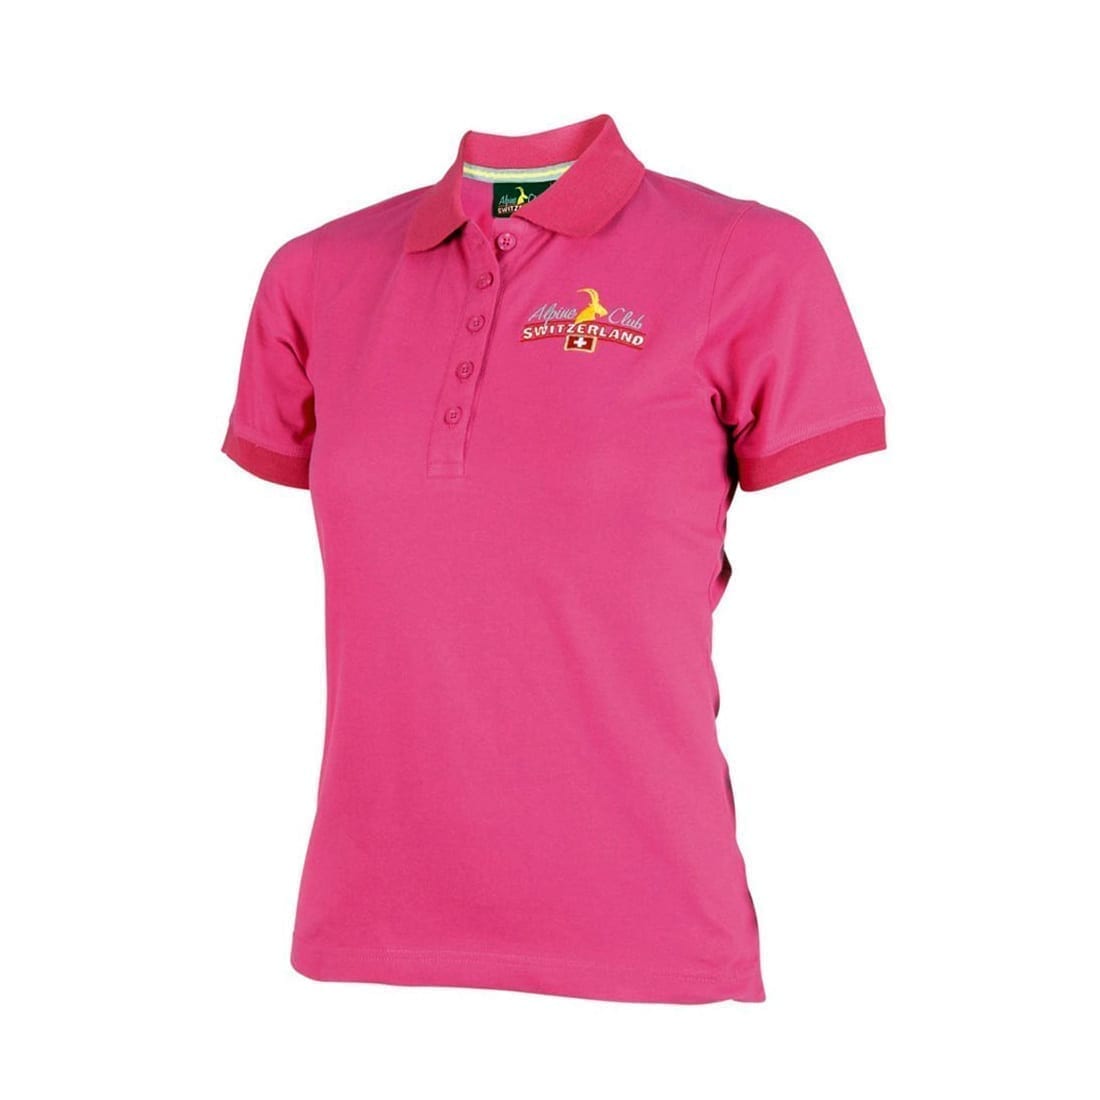 P 11002 Polo shirt for woman fast drying fitting pink